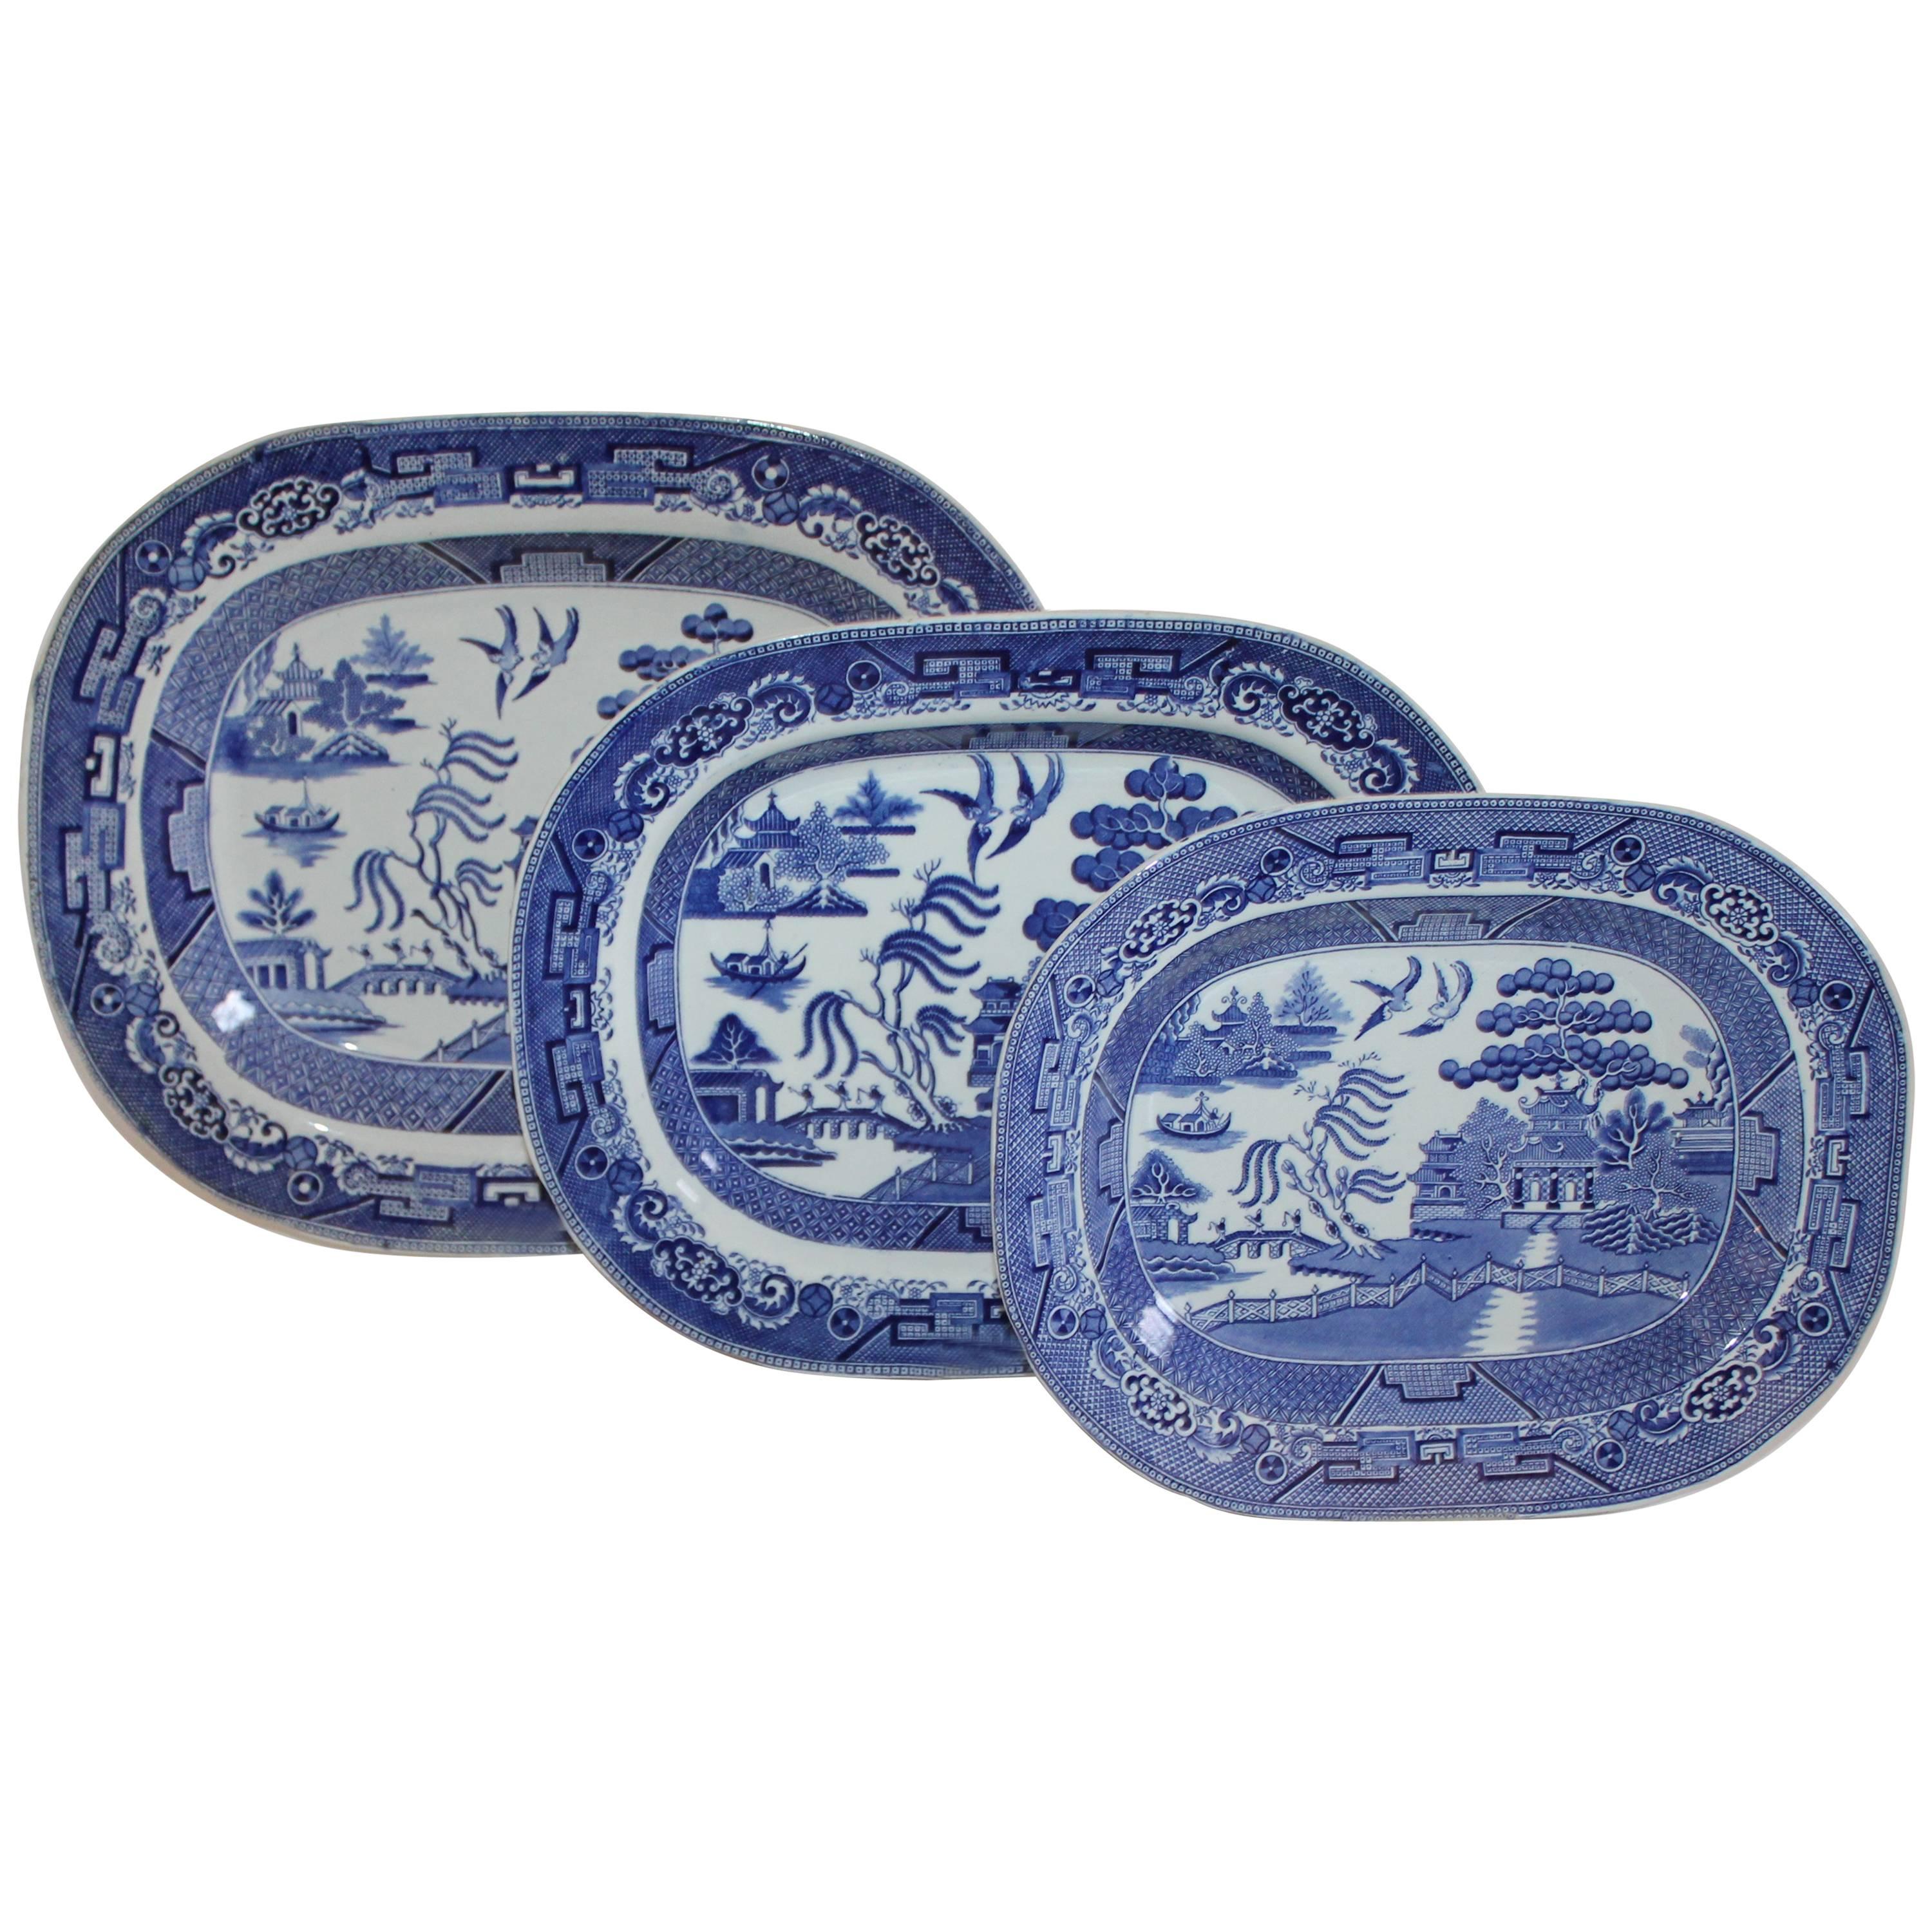 What is the story of the Blue Willow pattern?